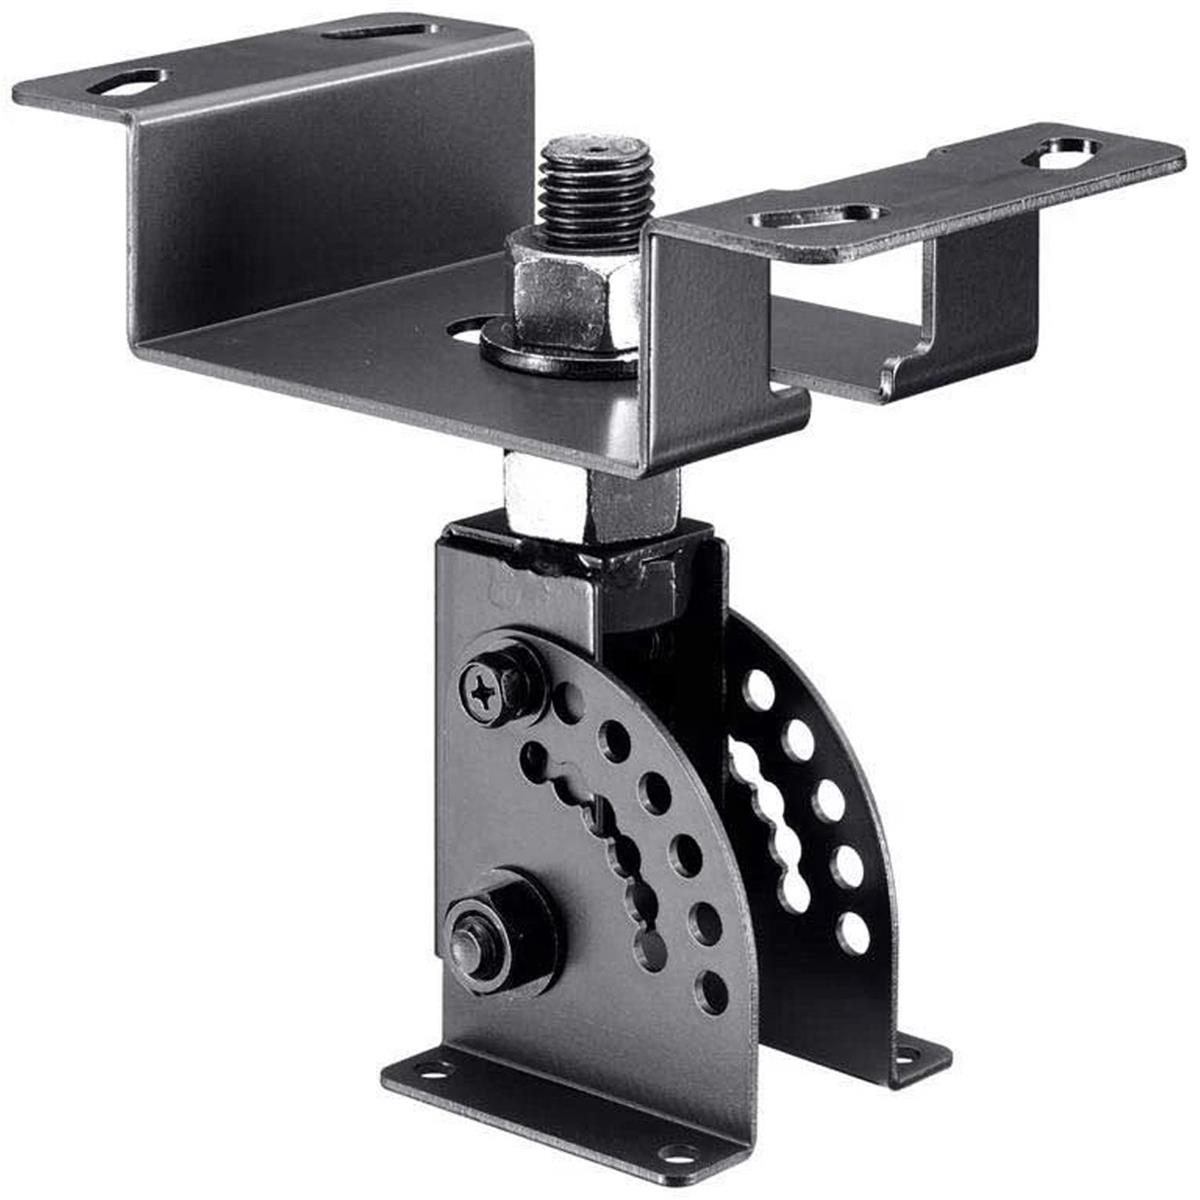 Image of TOA Electronics HY-CW1 Ceiling Mount Bracket for HX-5 Speakers